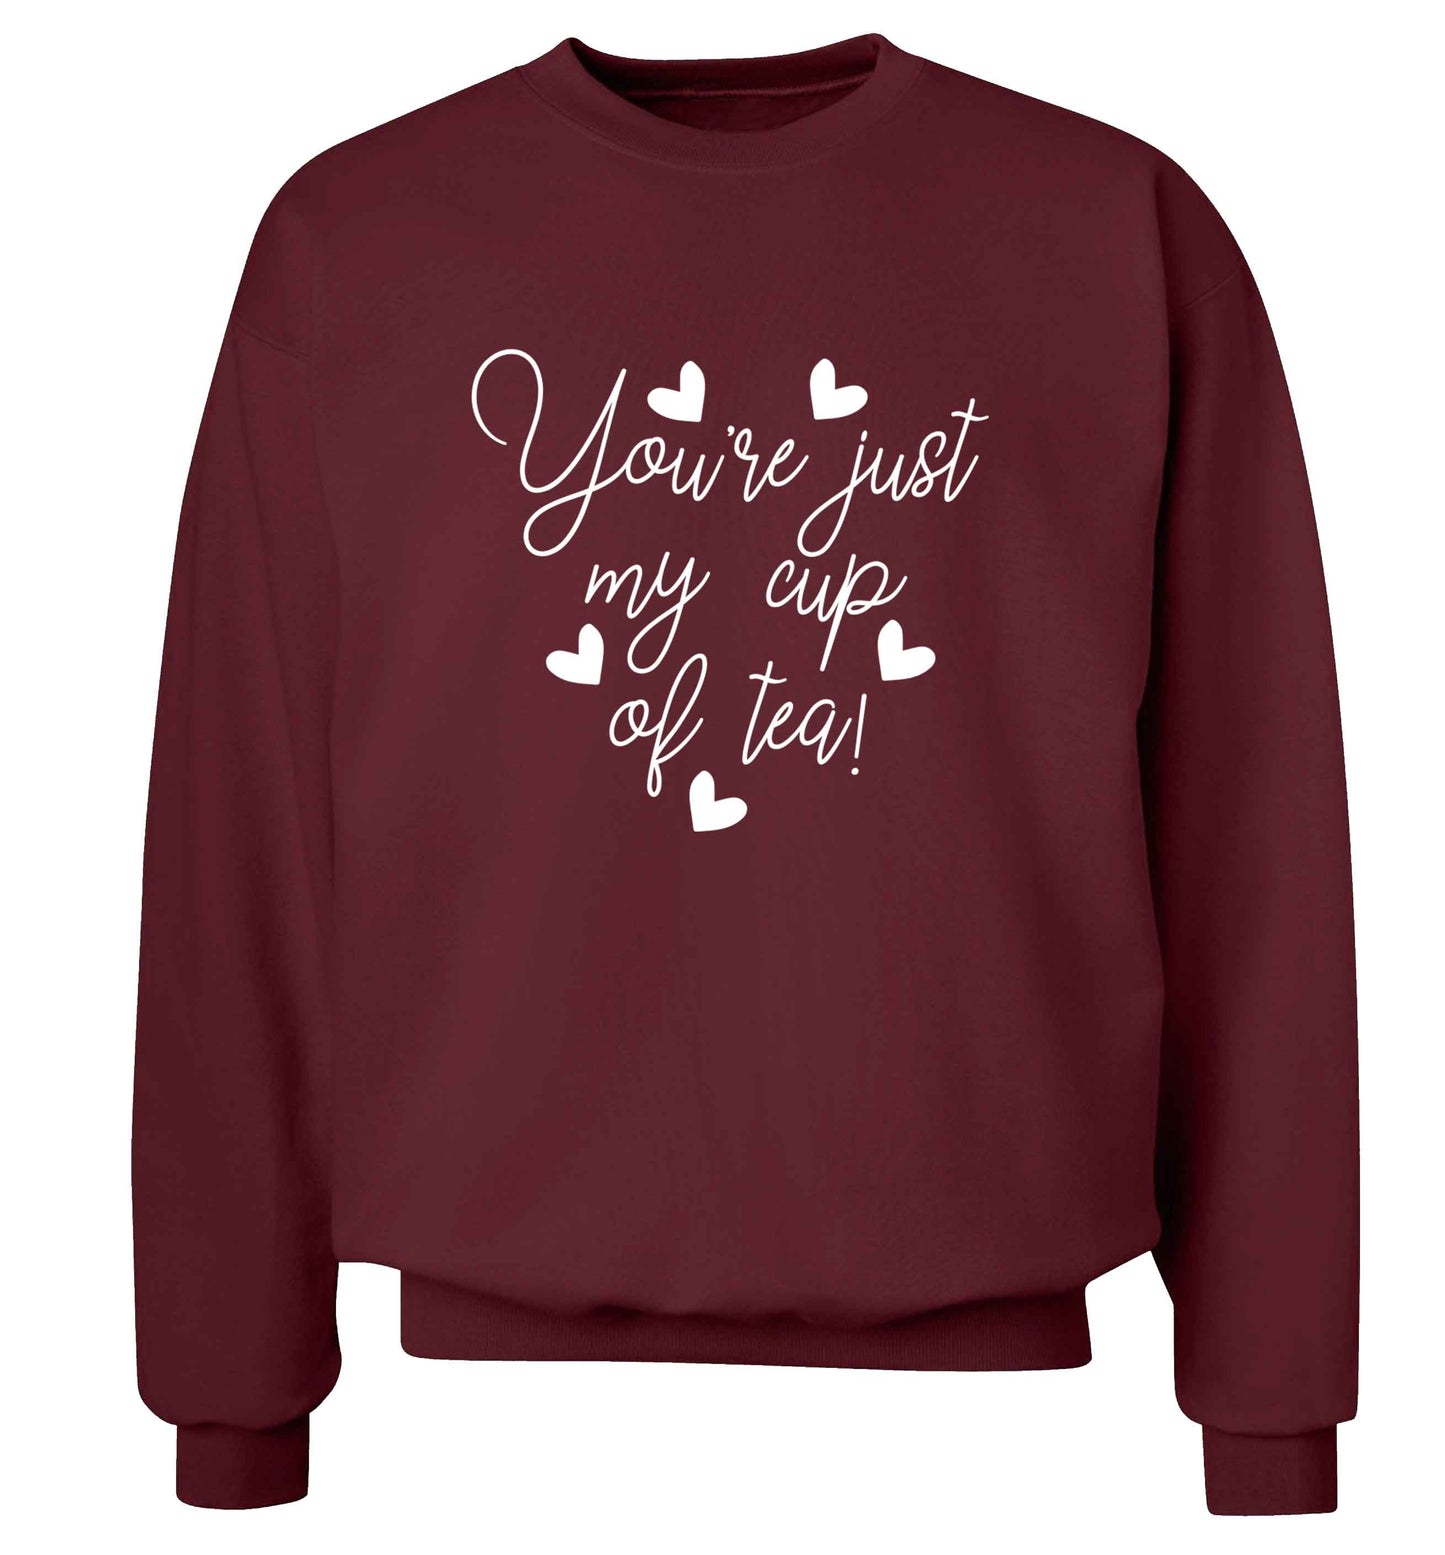 You're just my cup of tea adult's unisex maroon sweater 2XL